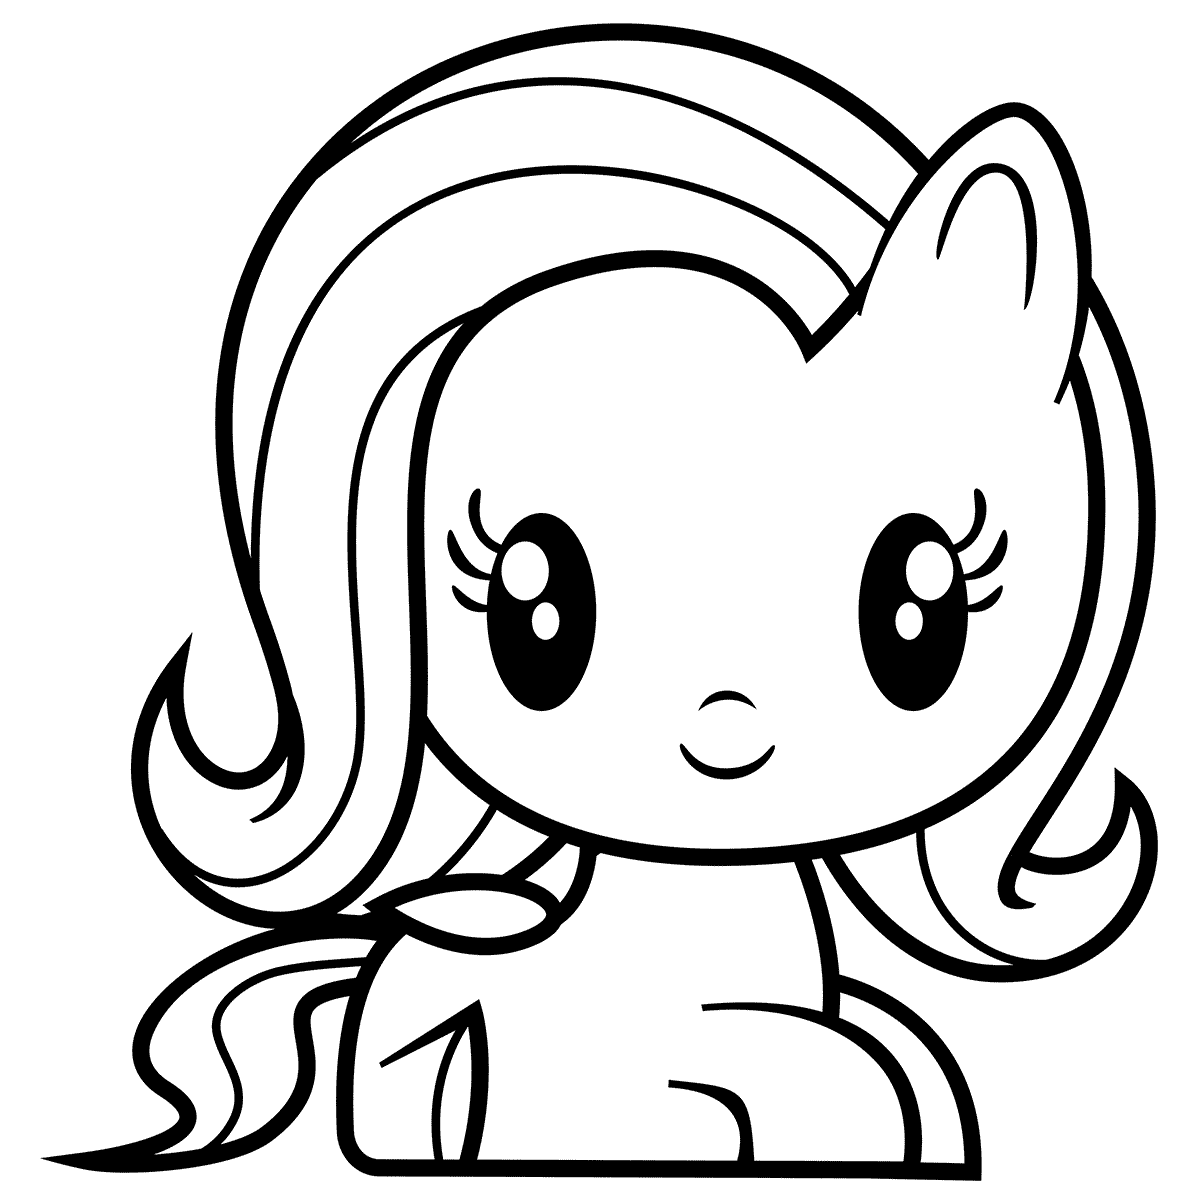 Cutie Mark Crew Fluttershy Coloring Pages